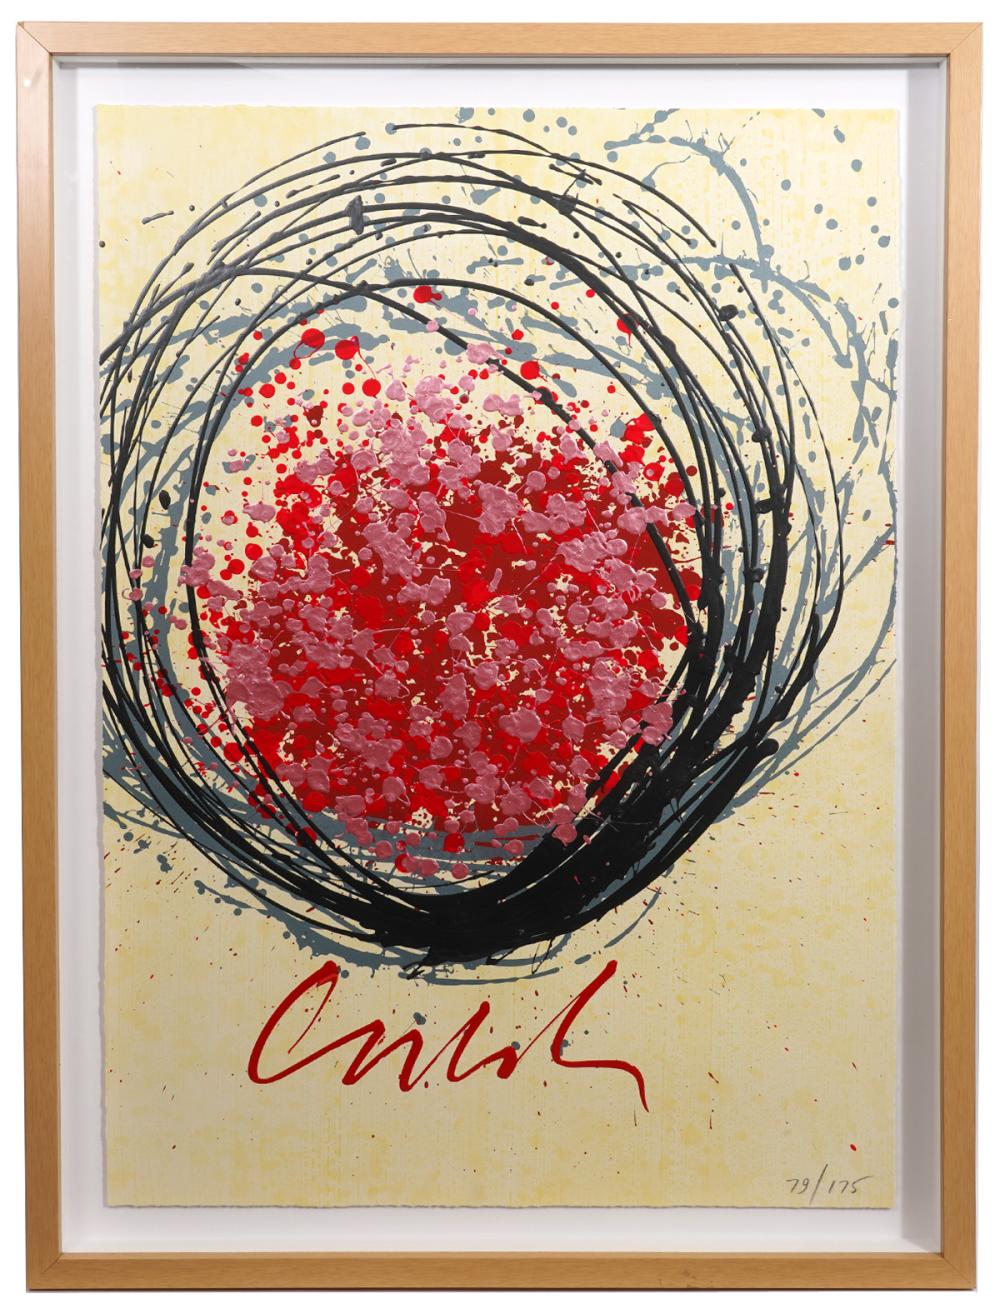 DALE CHIHULY FREE FLOAT LITHOGRAPH 2cf580